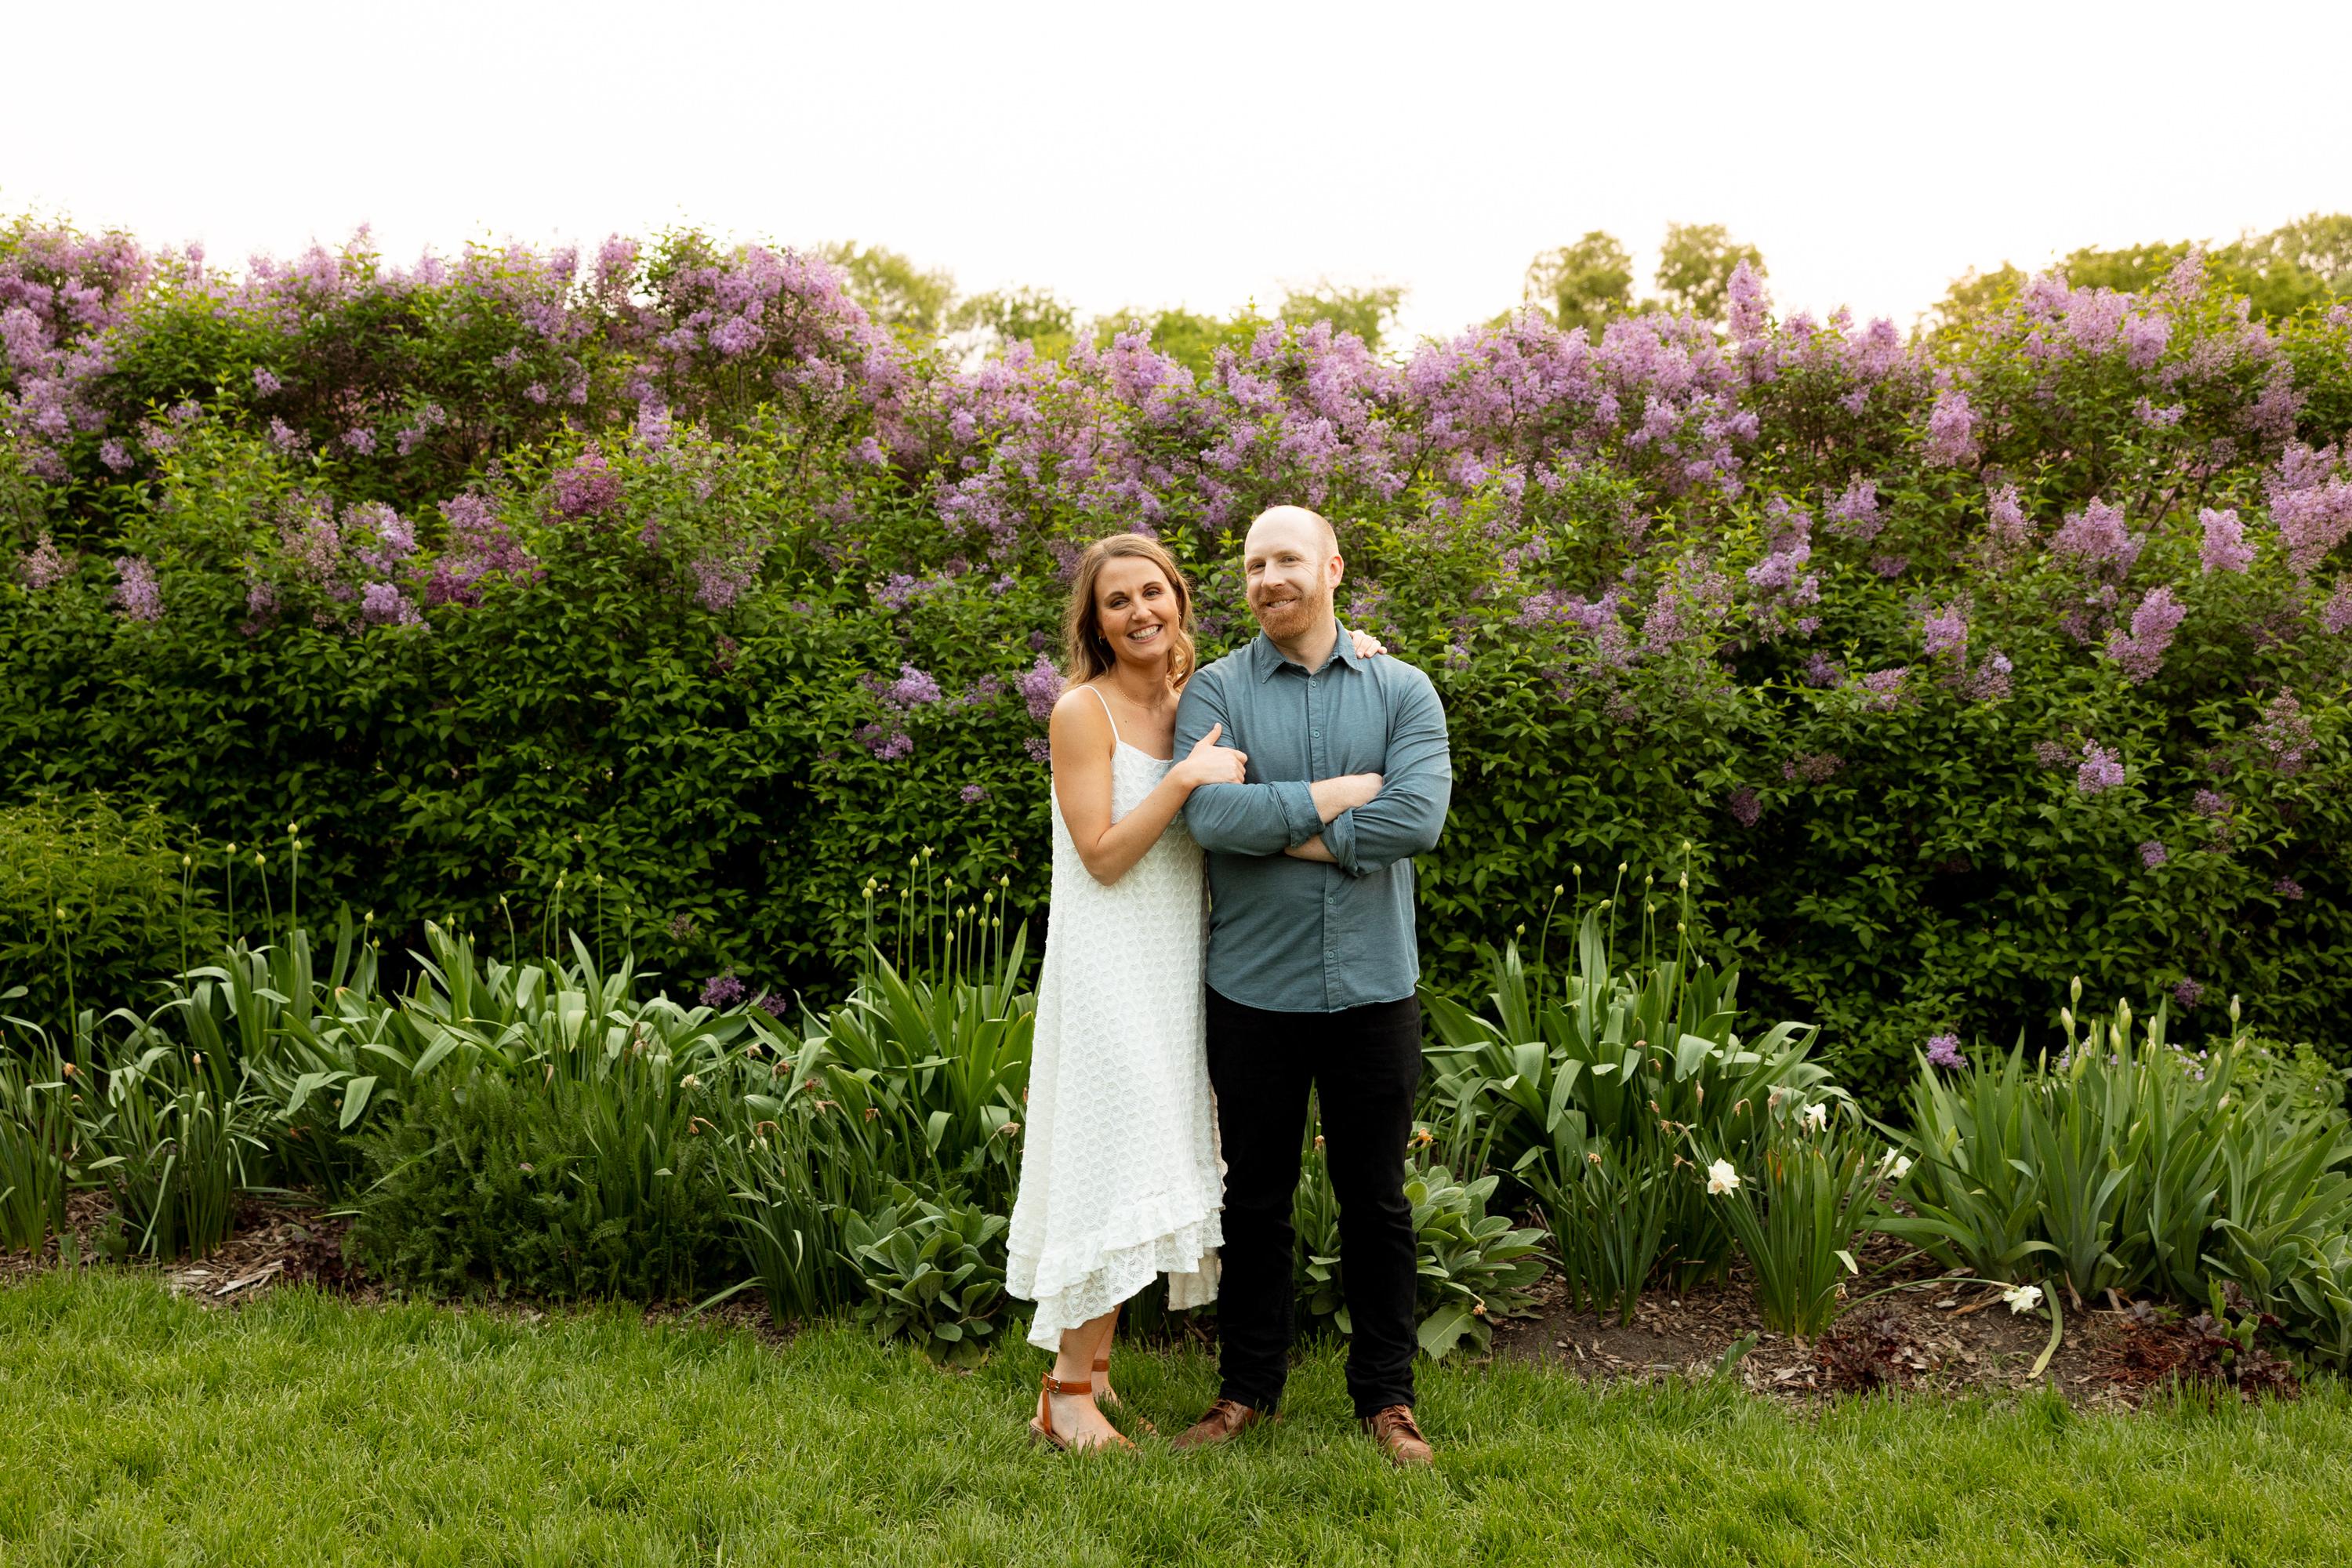 The Wedding Website of Hanna Middlebrook and Joe Richie